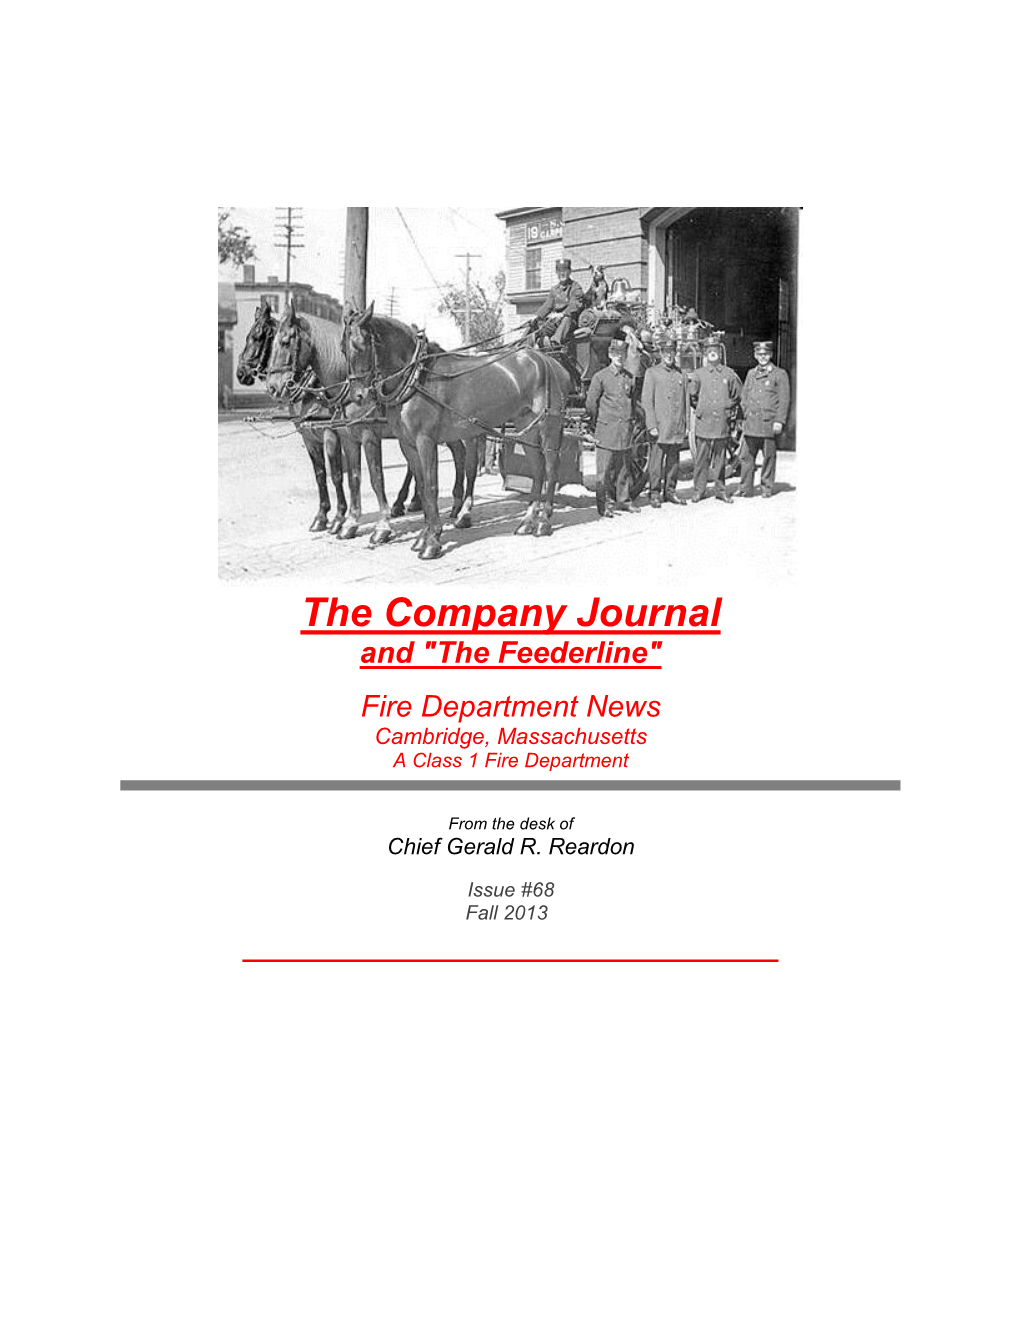 The Company Journal and "The Feederline"